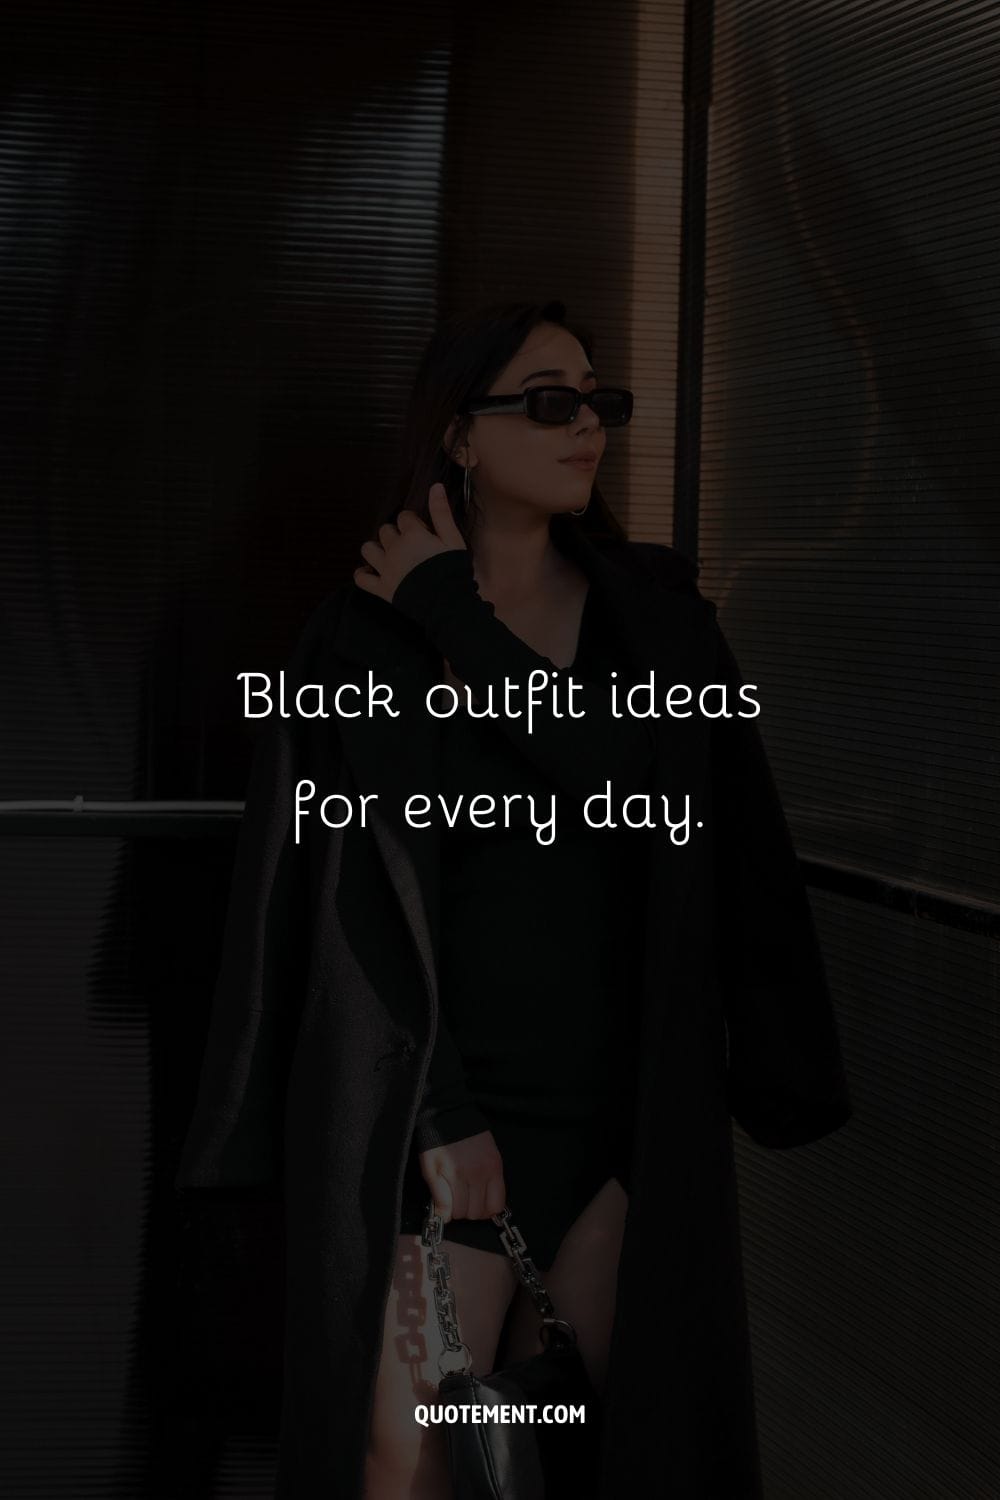 Black outfit ideas for every day.